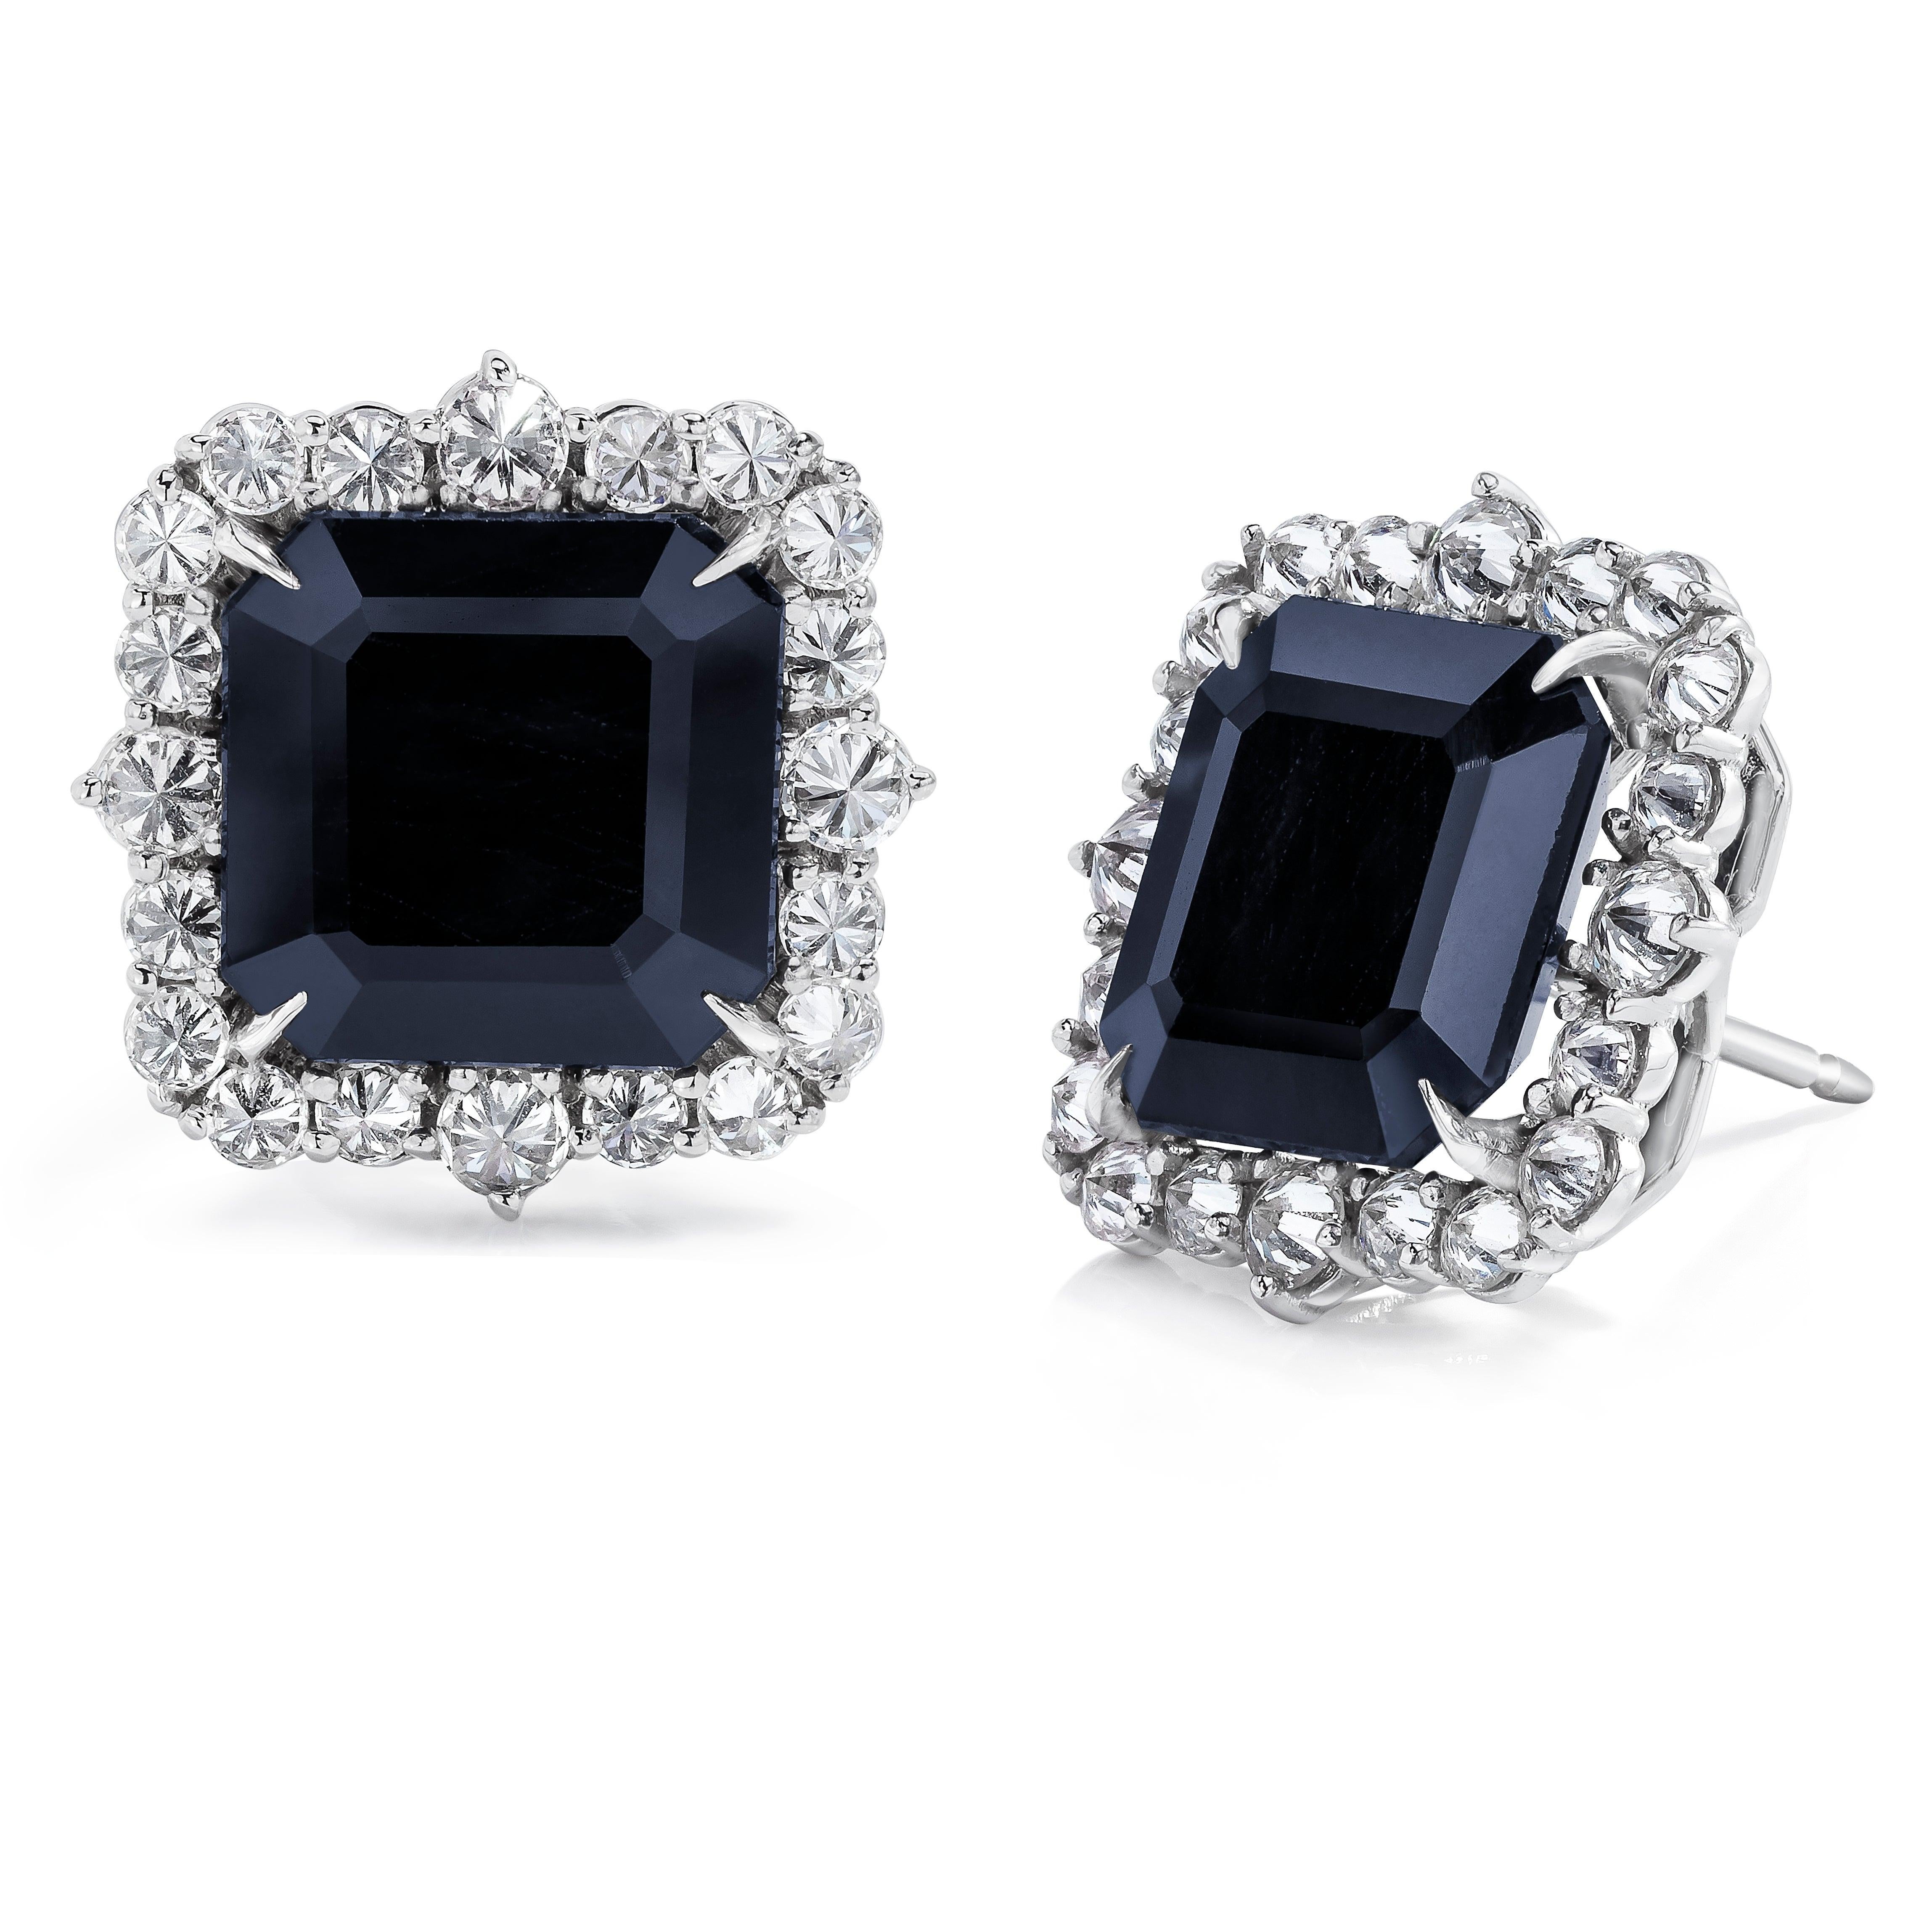 Beautiful and Bold Black Spinels weighing 16.22 Carats surrounded by Reverse Set White Round Brilliant Diamonds weighing 2.33 Carats. Set in 18 Karat White Gold.